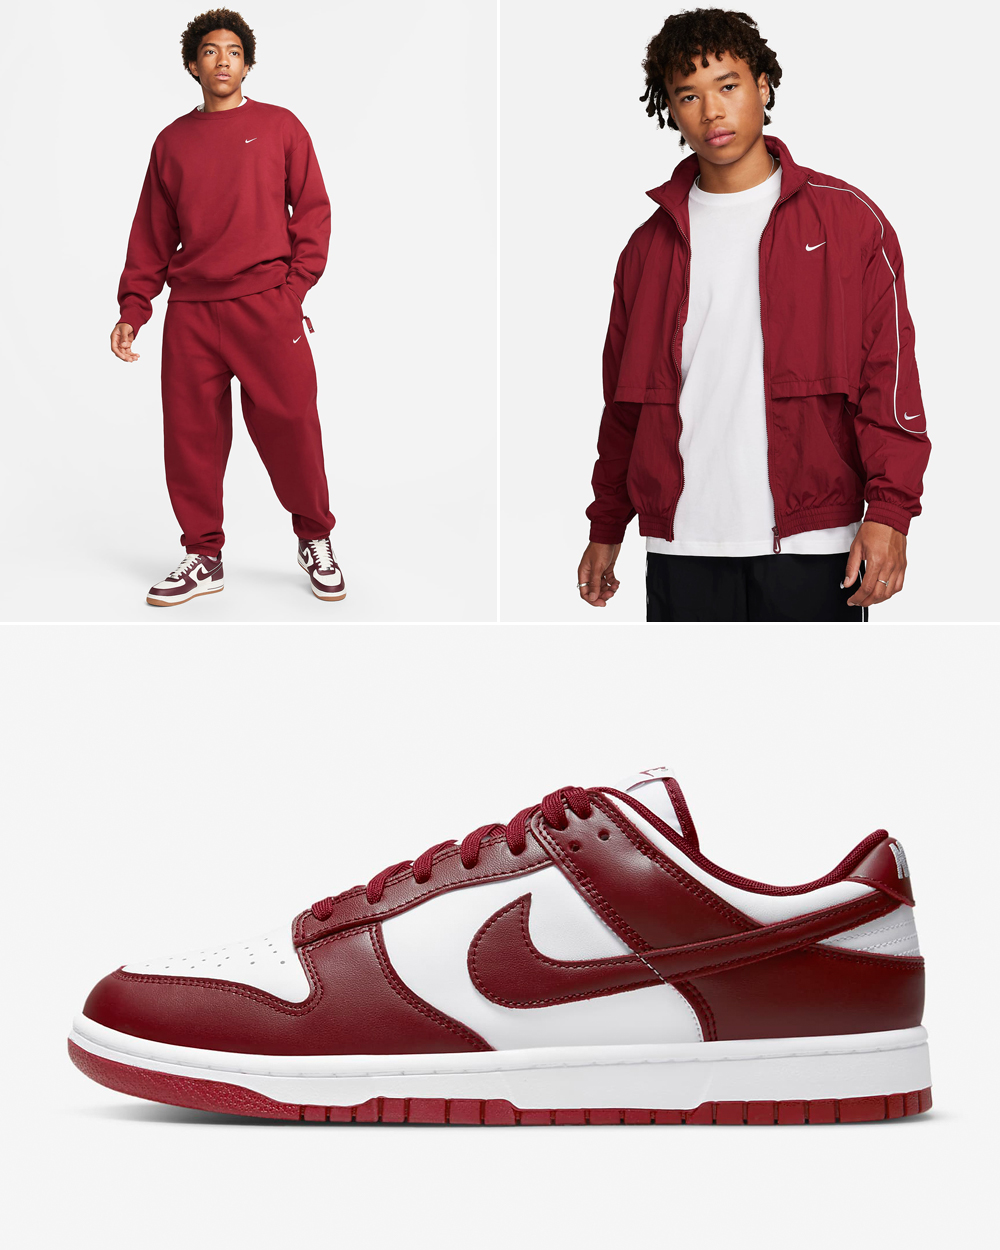 Nike Dunk Low Team Red Matching Outfits